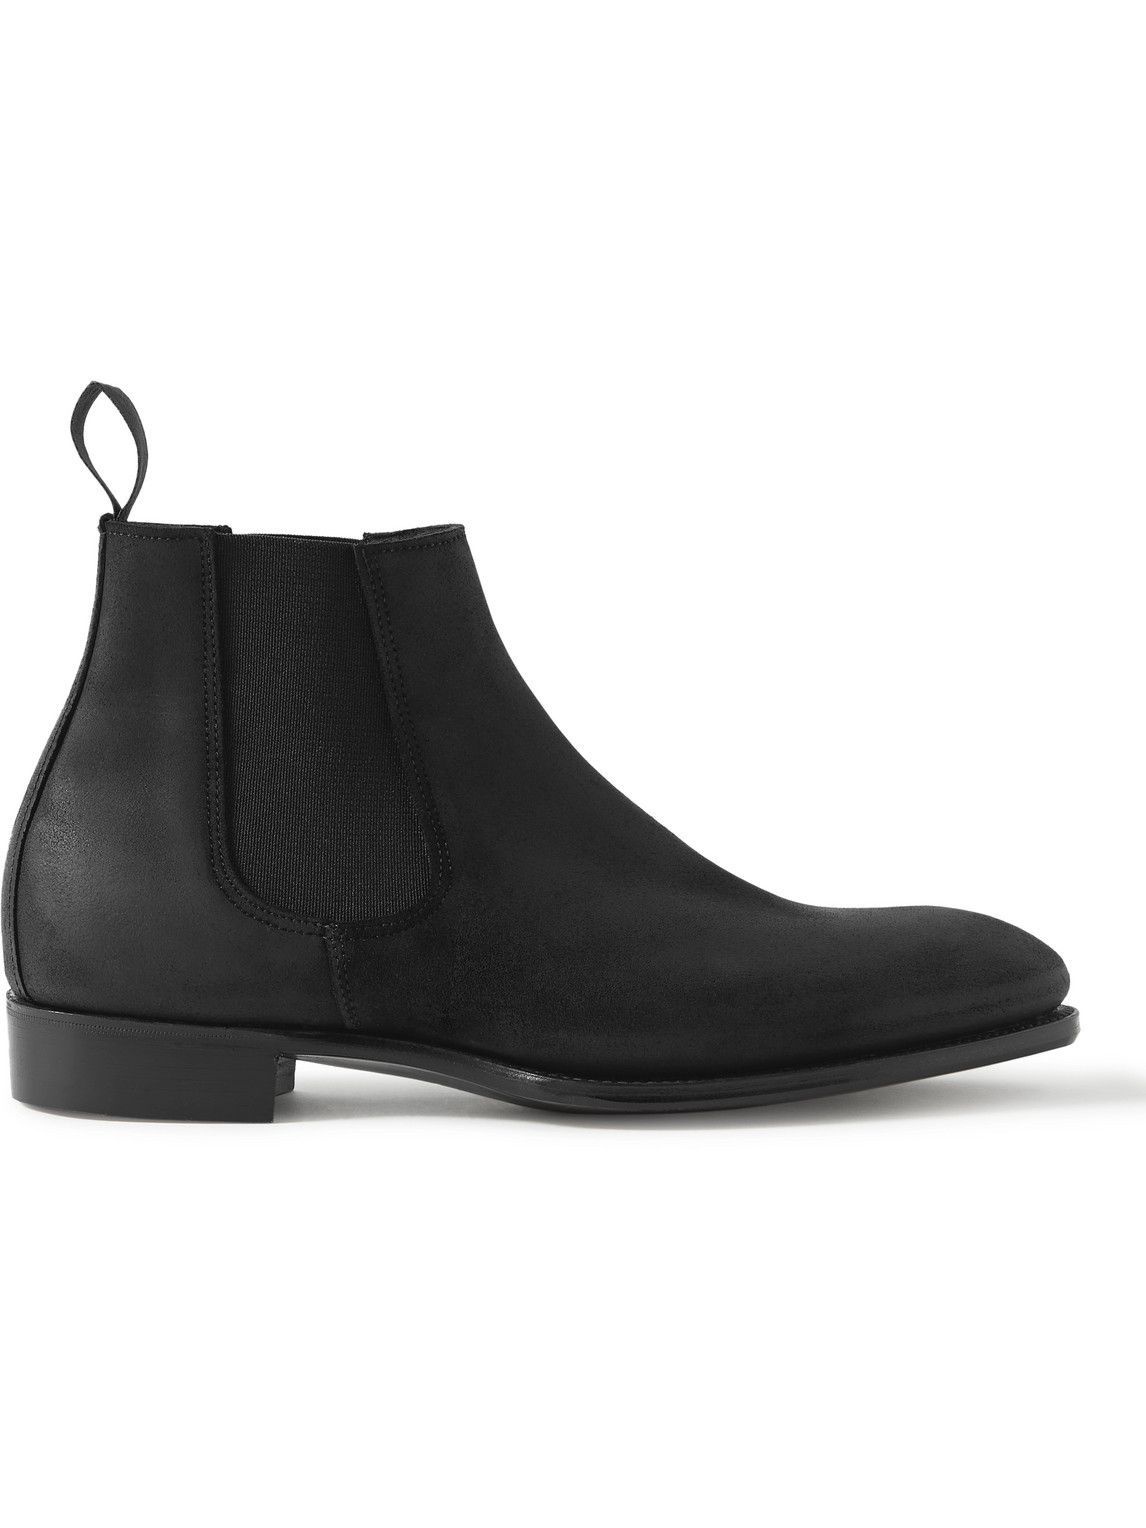 George Cleverley - Jason Roughout Suede Chelsea Boots - Black George ...